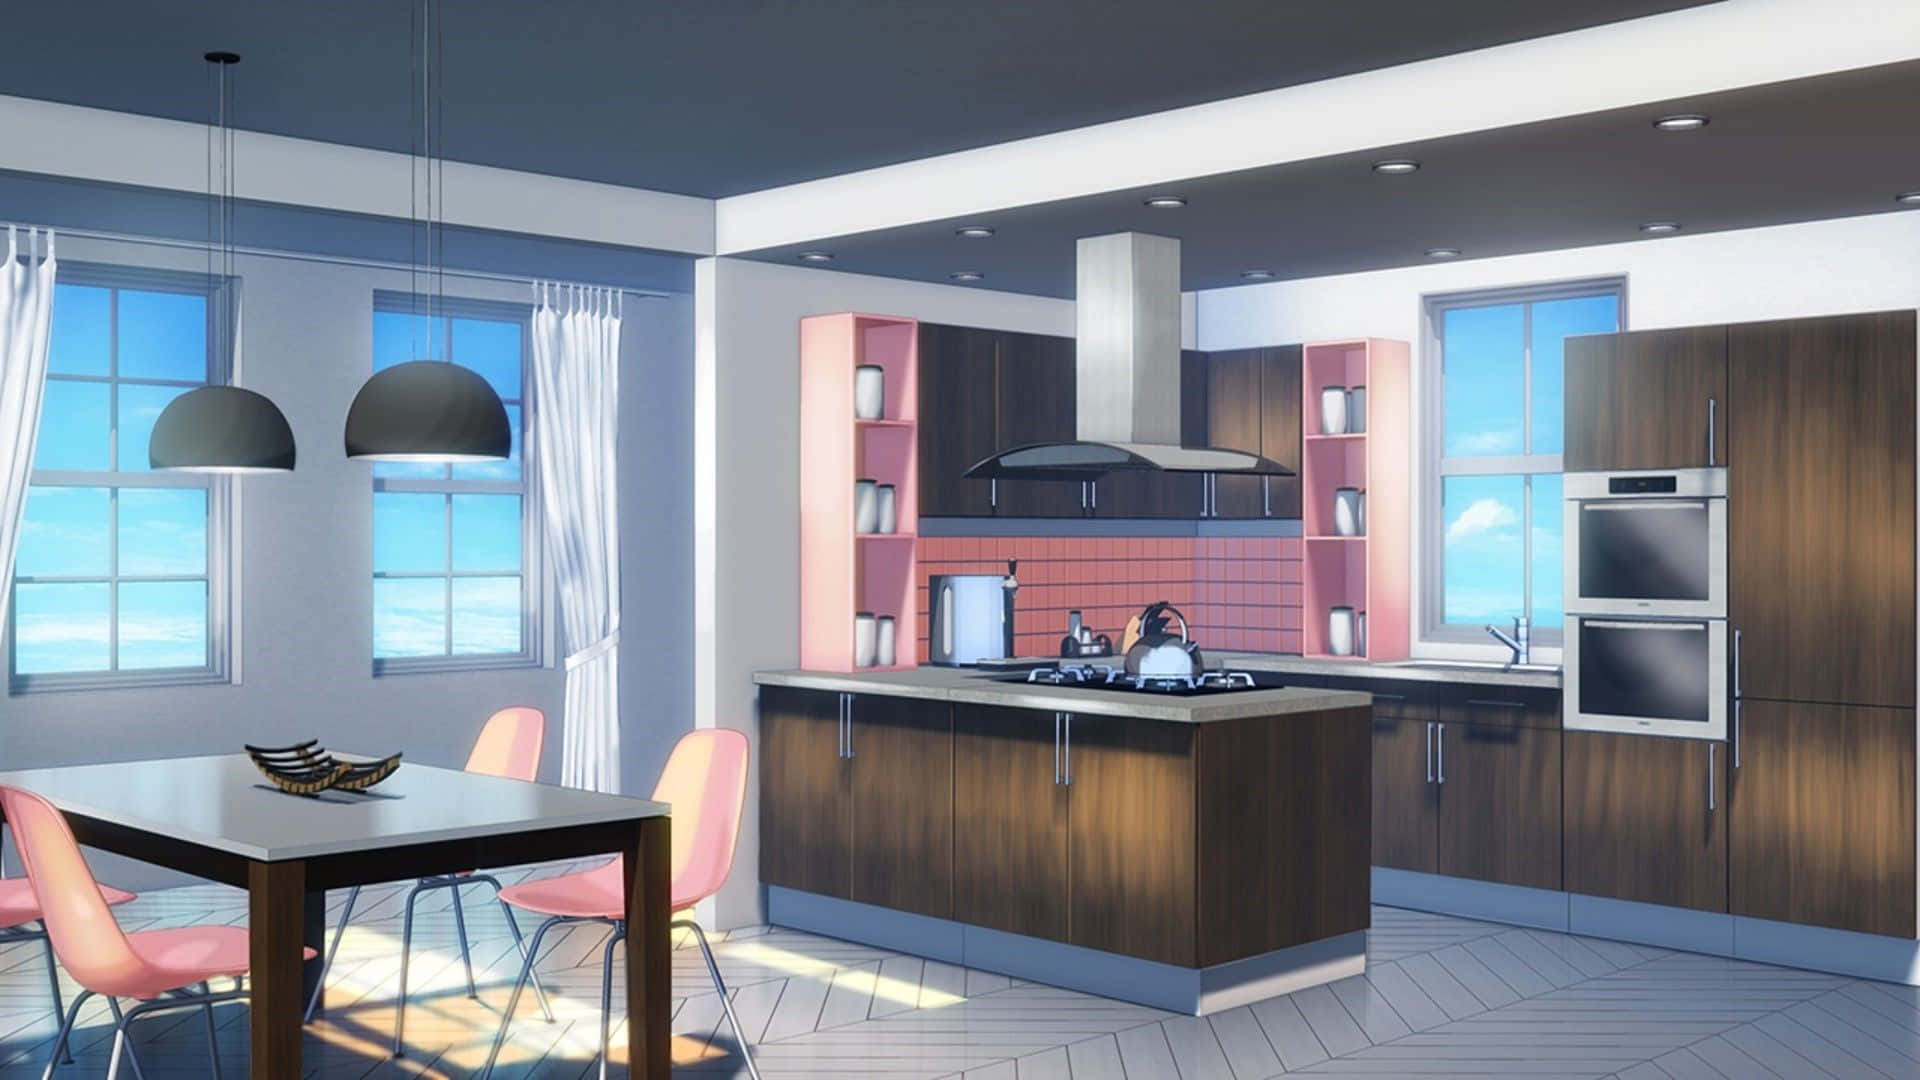 kitchen in anime style